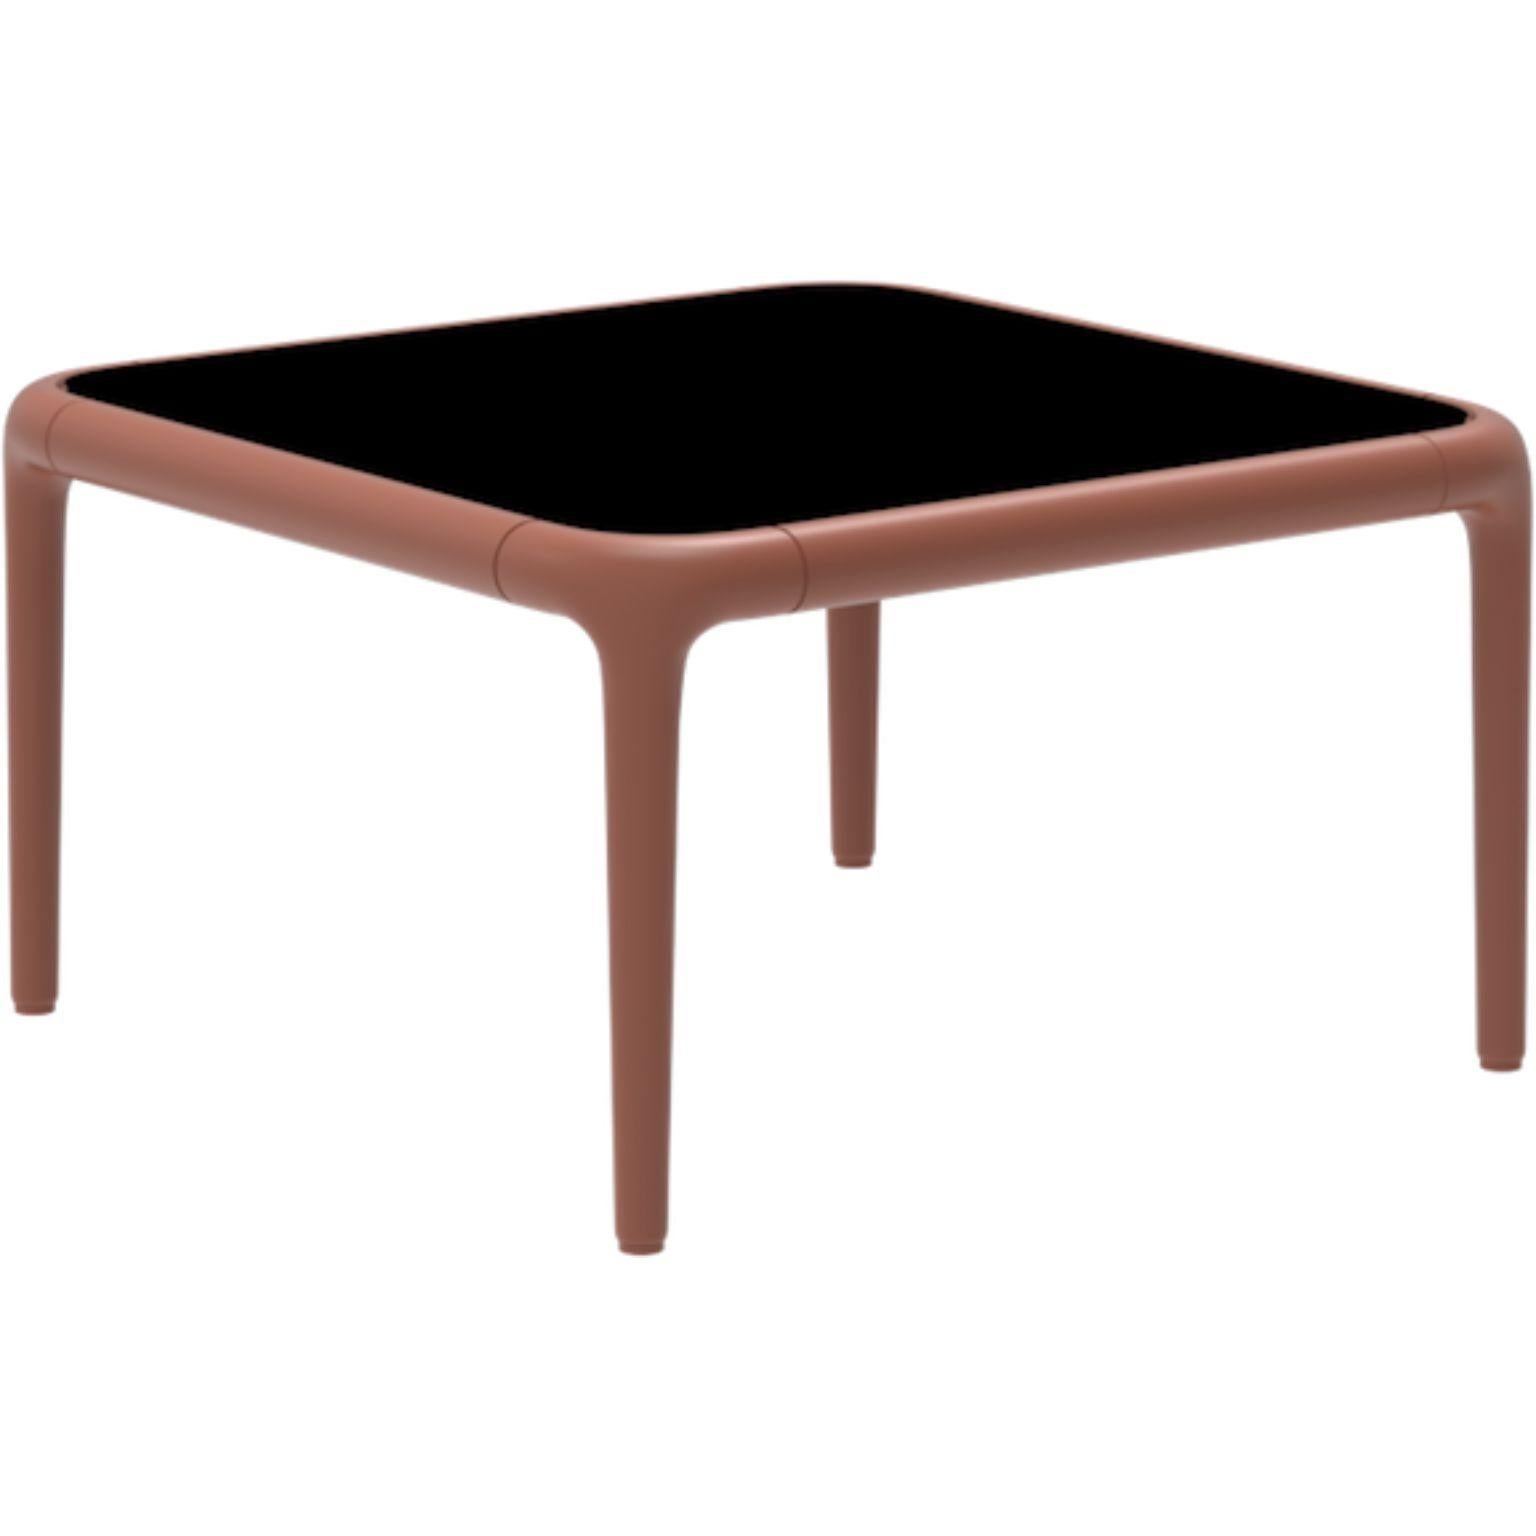 Xaloc salmon coffee table 50 with glass top by MOWEE
Dimensions: D50 x W50 x H28 cm
Materials: Aluminum, tinted tempered glass top.
Also available in different aluminum colors and finishes (HPL Black Edge or Neolith). 

Xaloc synthesizes the